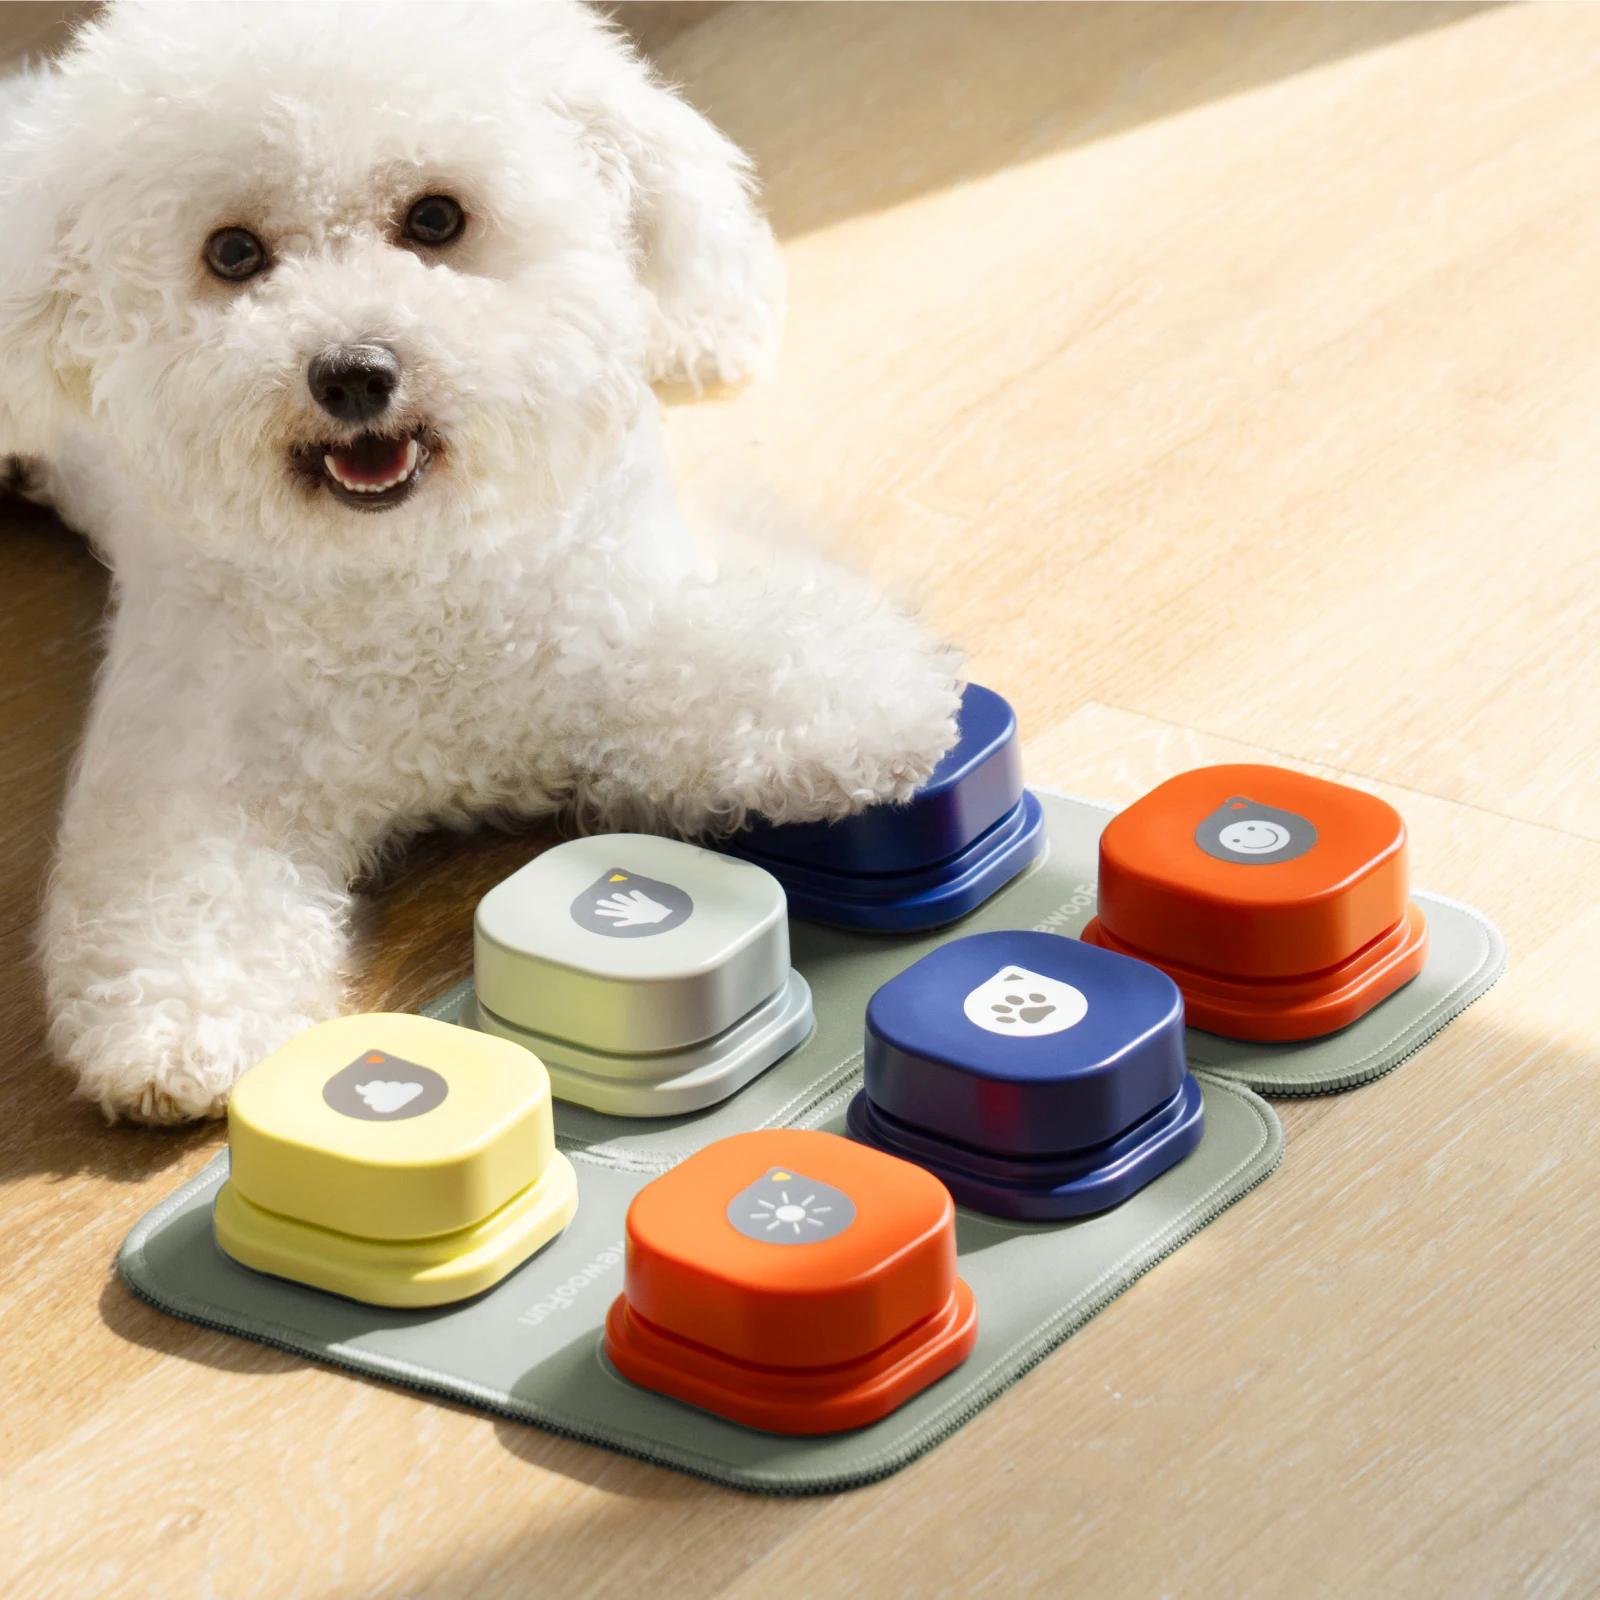 

Dog Button Record Talking Pet Communication Vocal Training Interactive Toy Bell Ringer with Pad and Sticker Puppy Toys